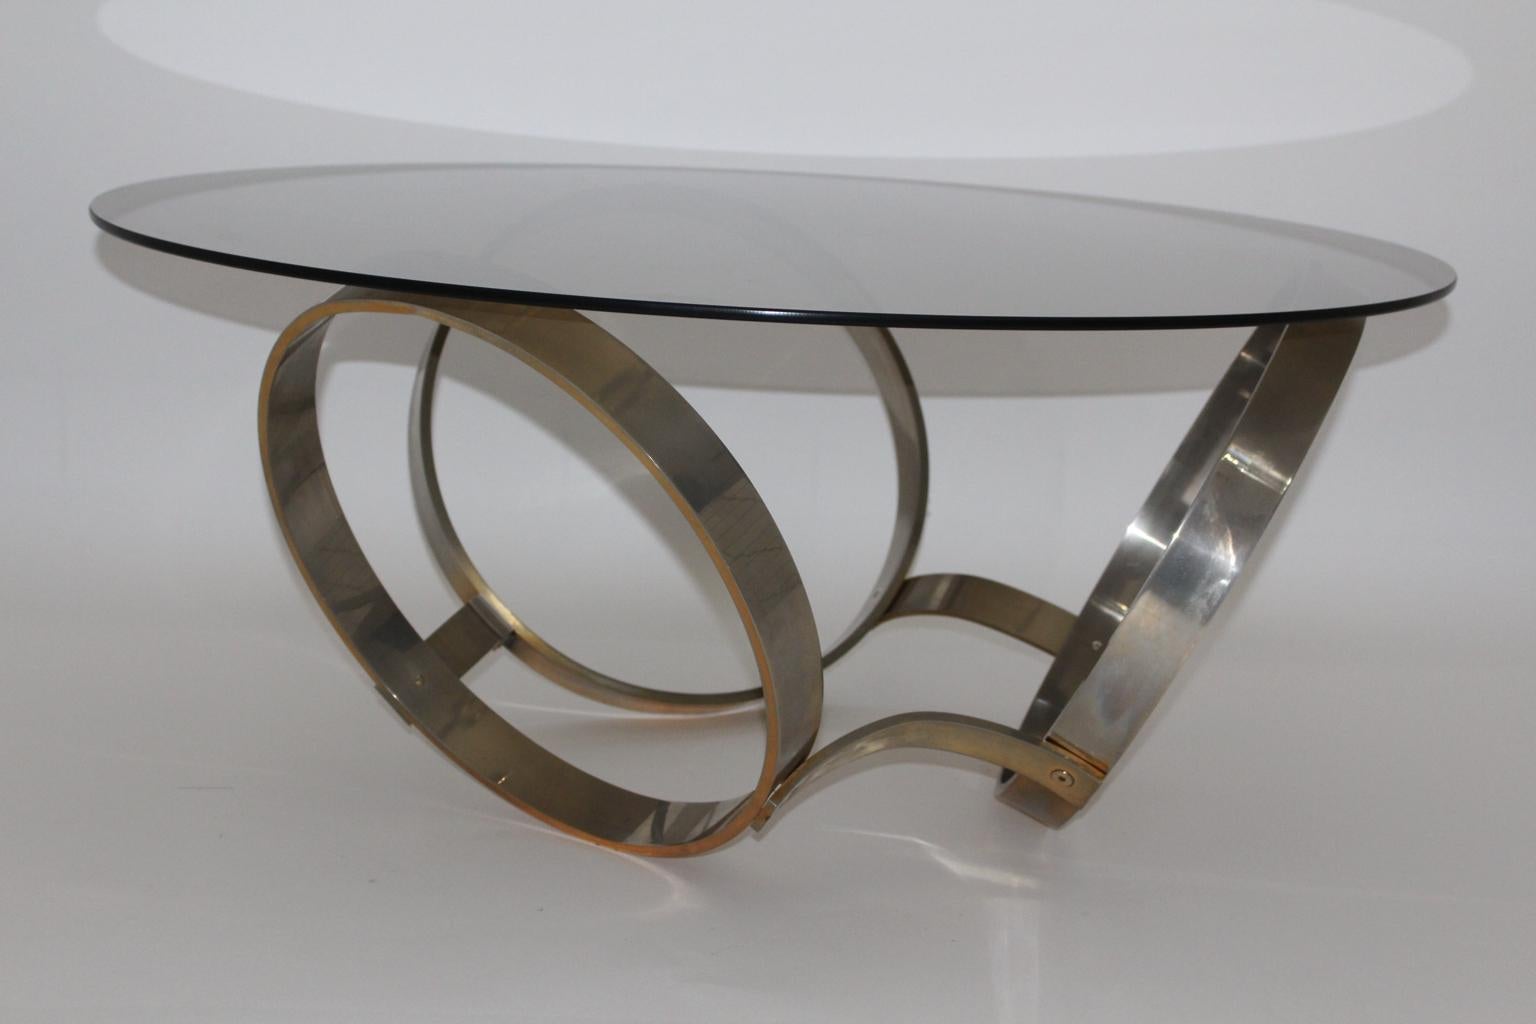 Space Age vintage coffee table or sofa table from brass plated metal and smoked glass plate circa 1970.
The brass plated metal base features three ring like elements as trinity.
Through the years and ages the brass plated metal base blends with